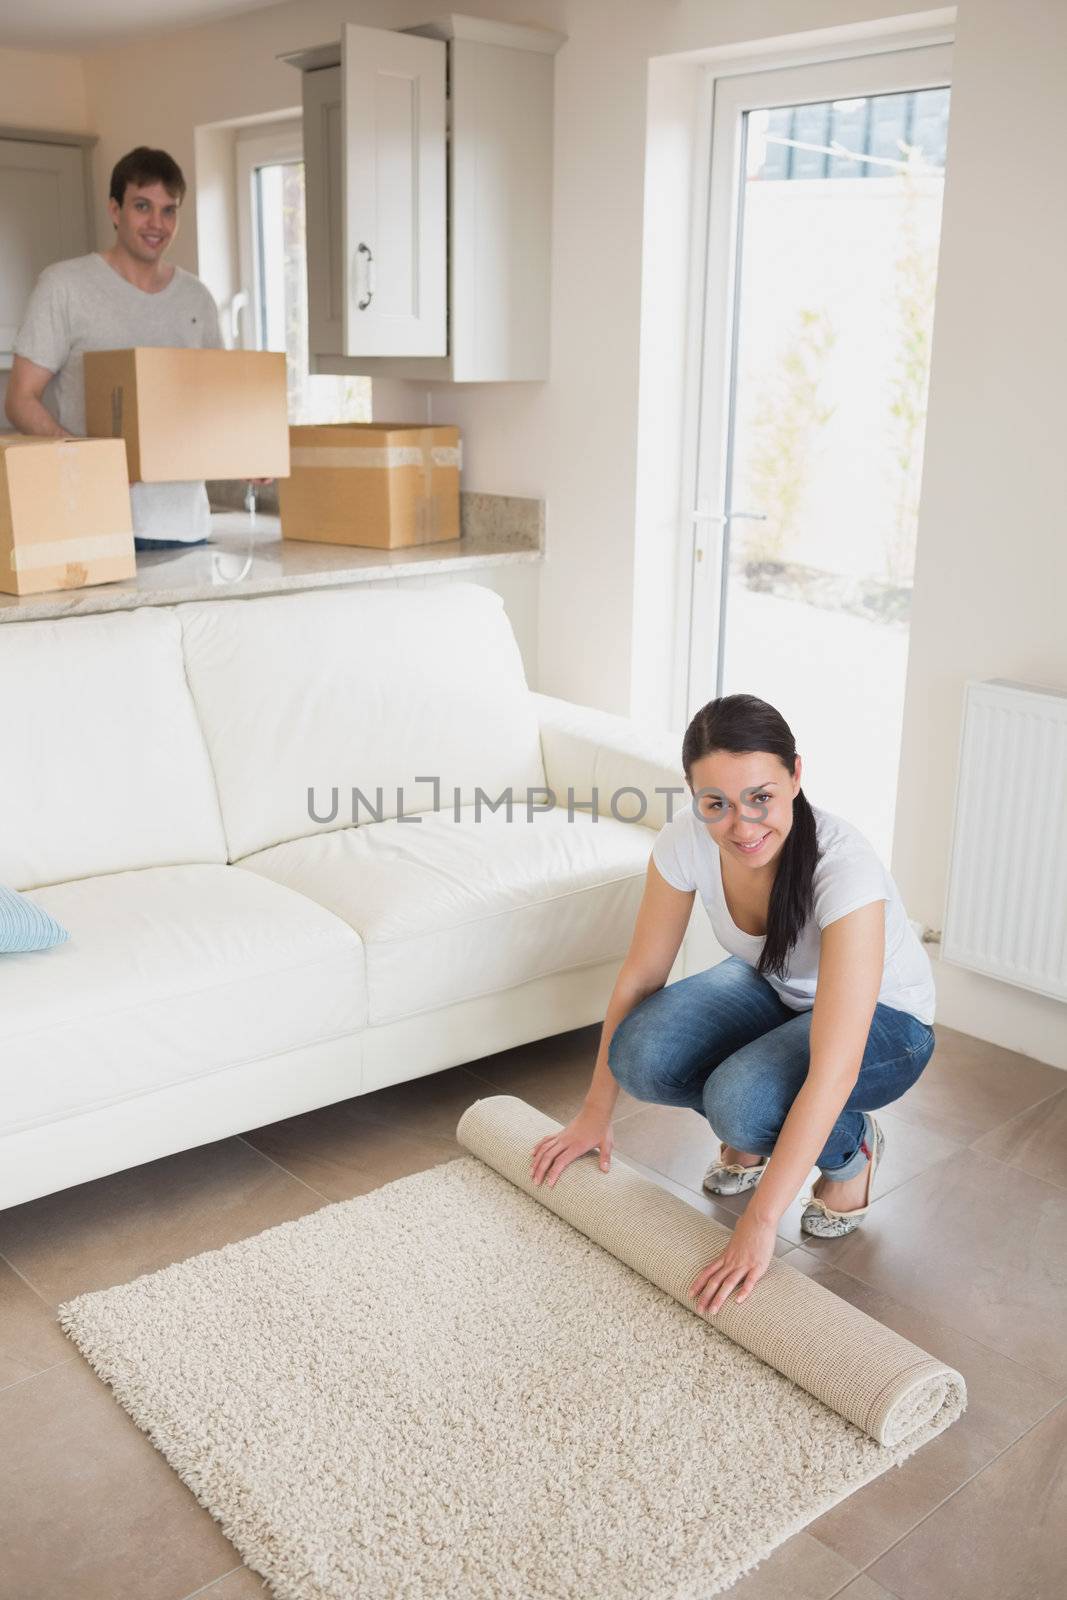 Two people furnishing the house while holding boxes and rolling out a carpet